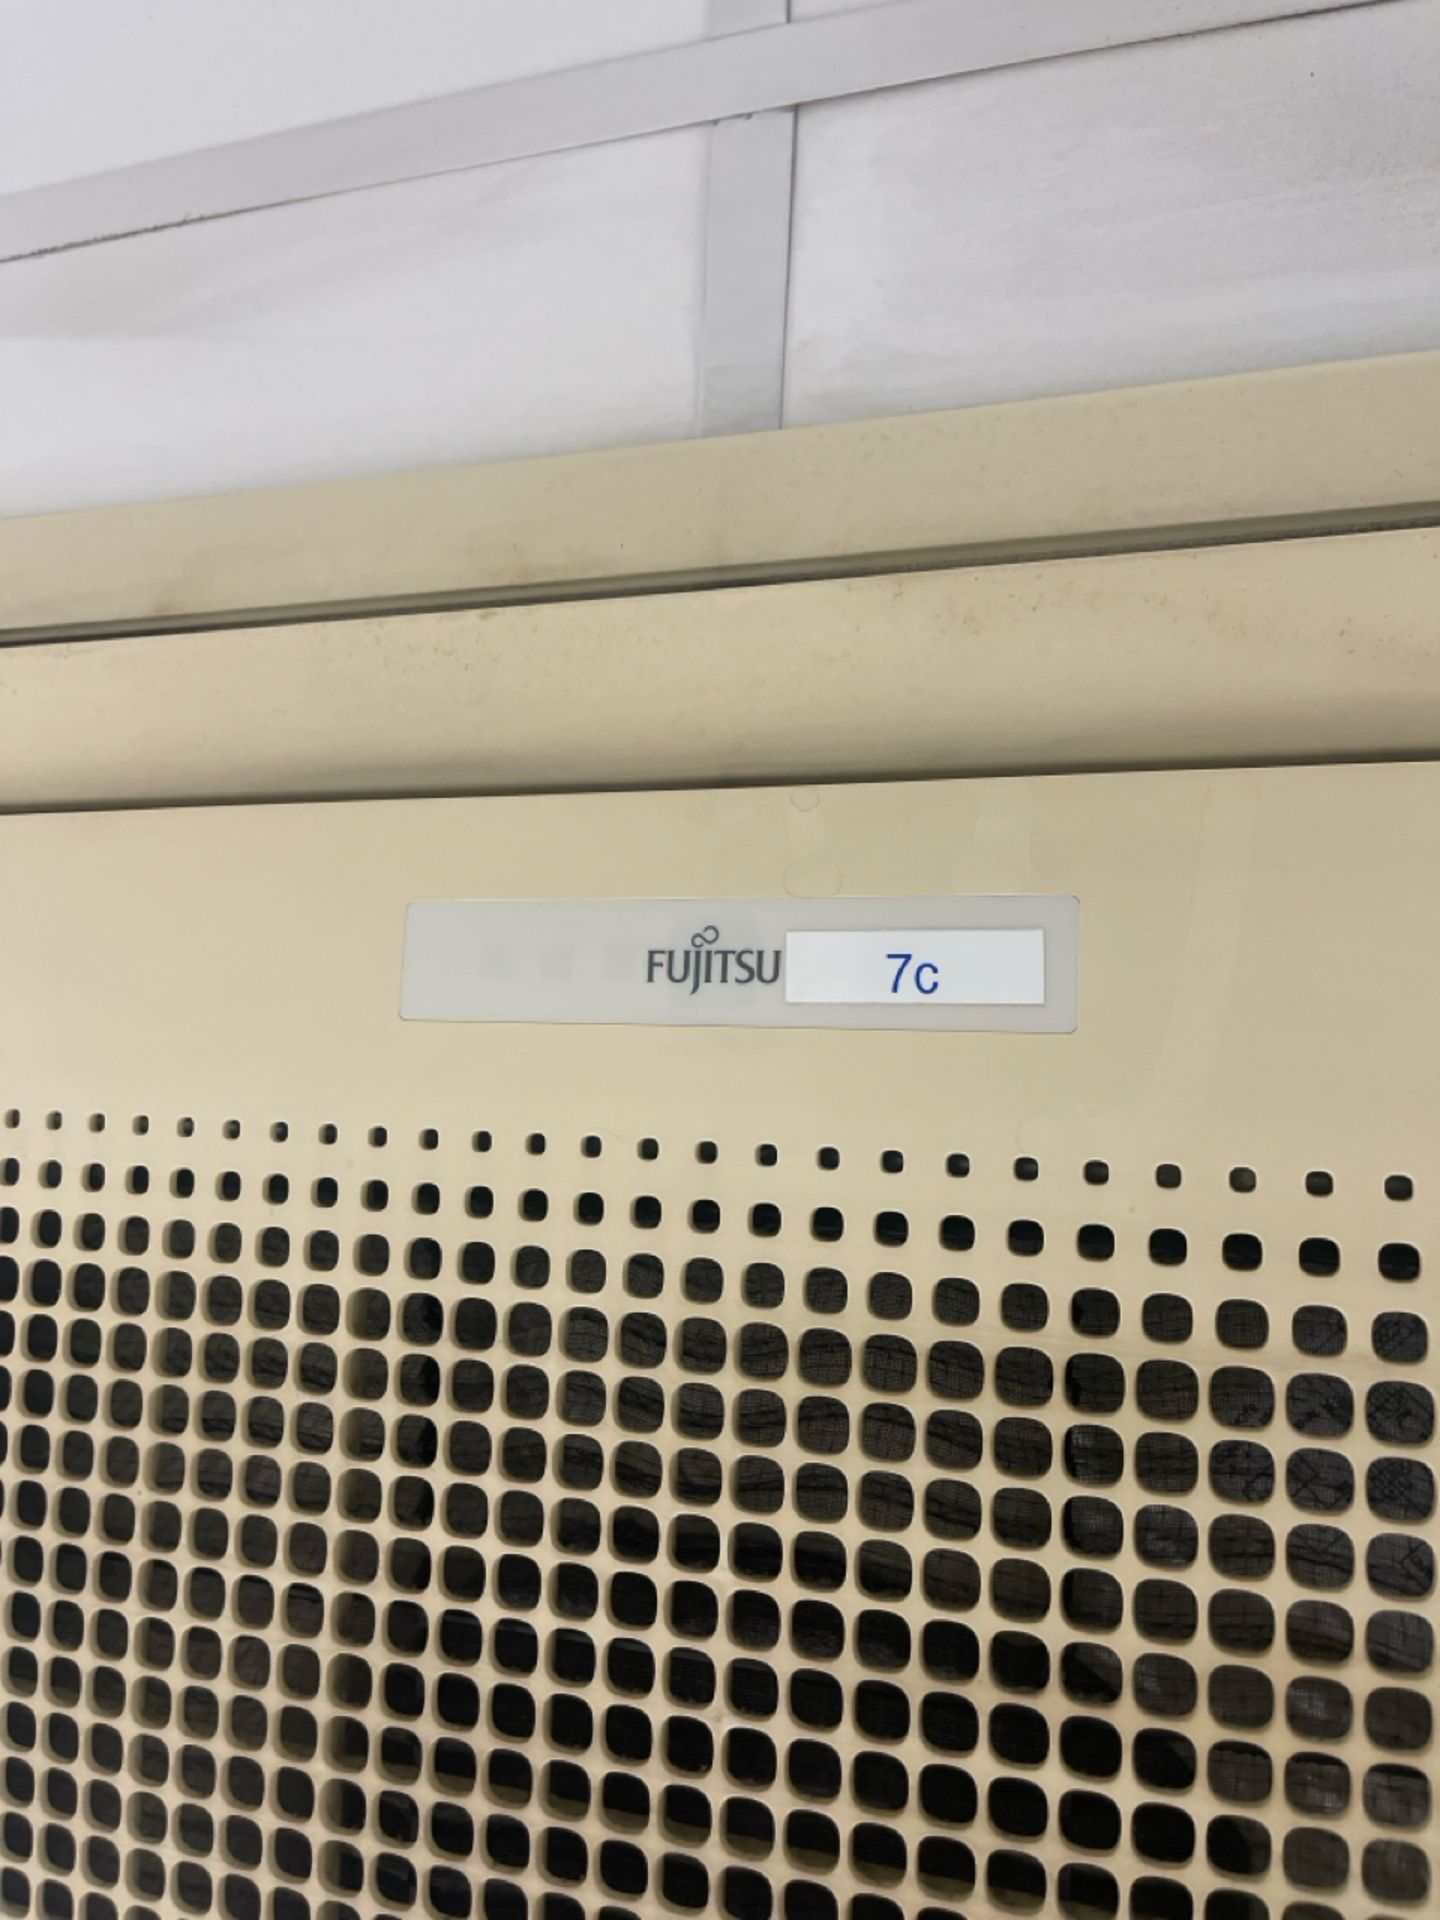 Fujitsu Air Conditioning Ceiling Cassette - Image 2 of 2